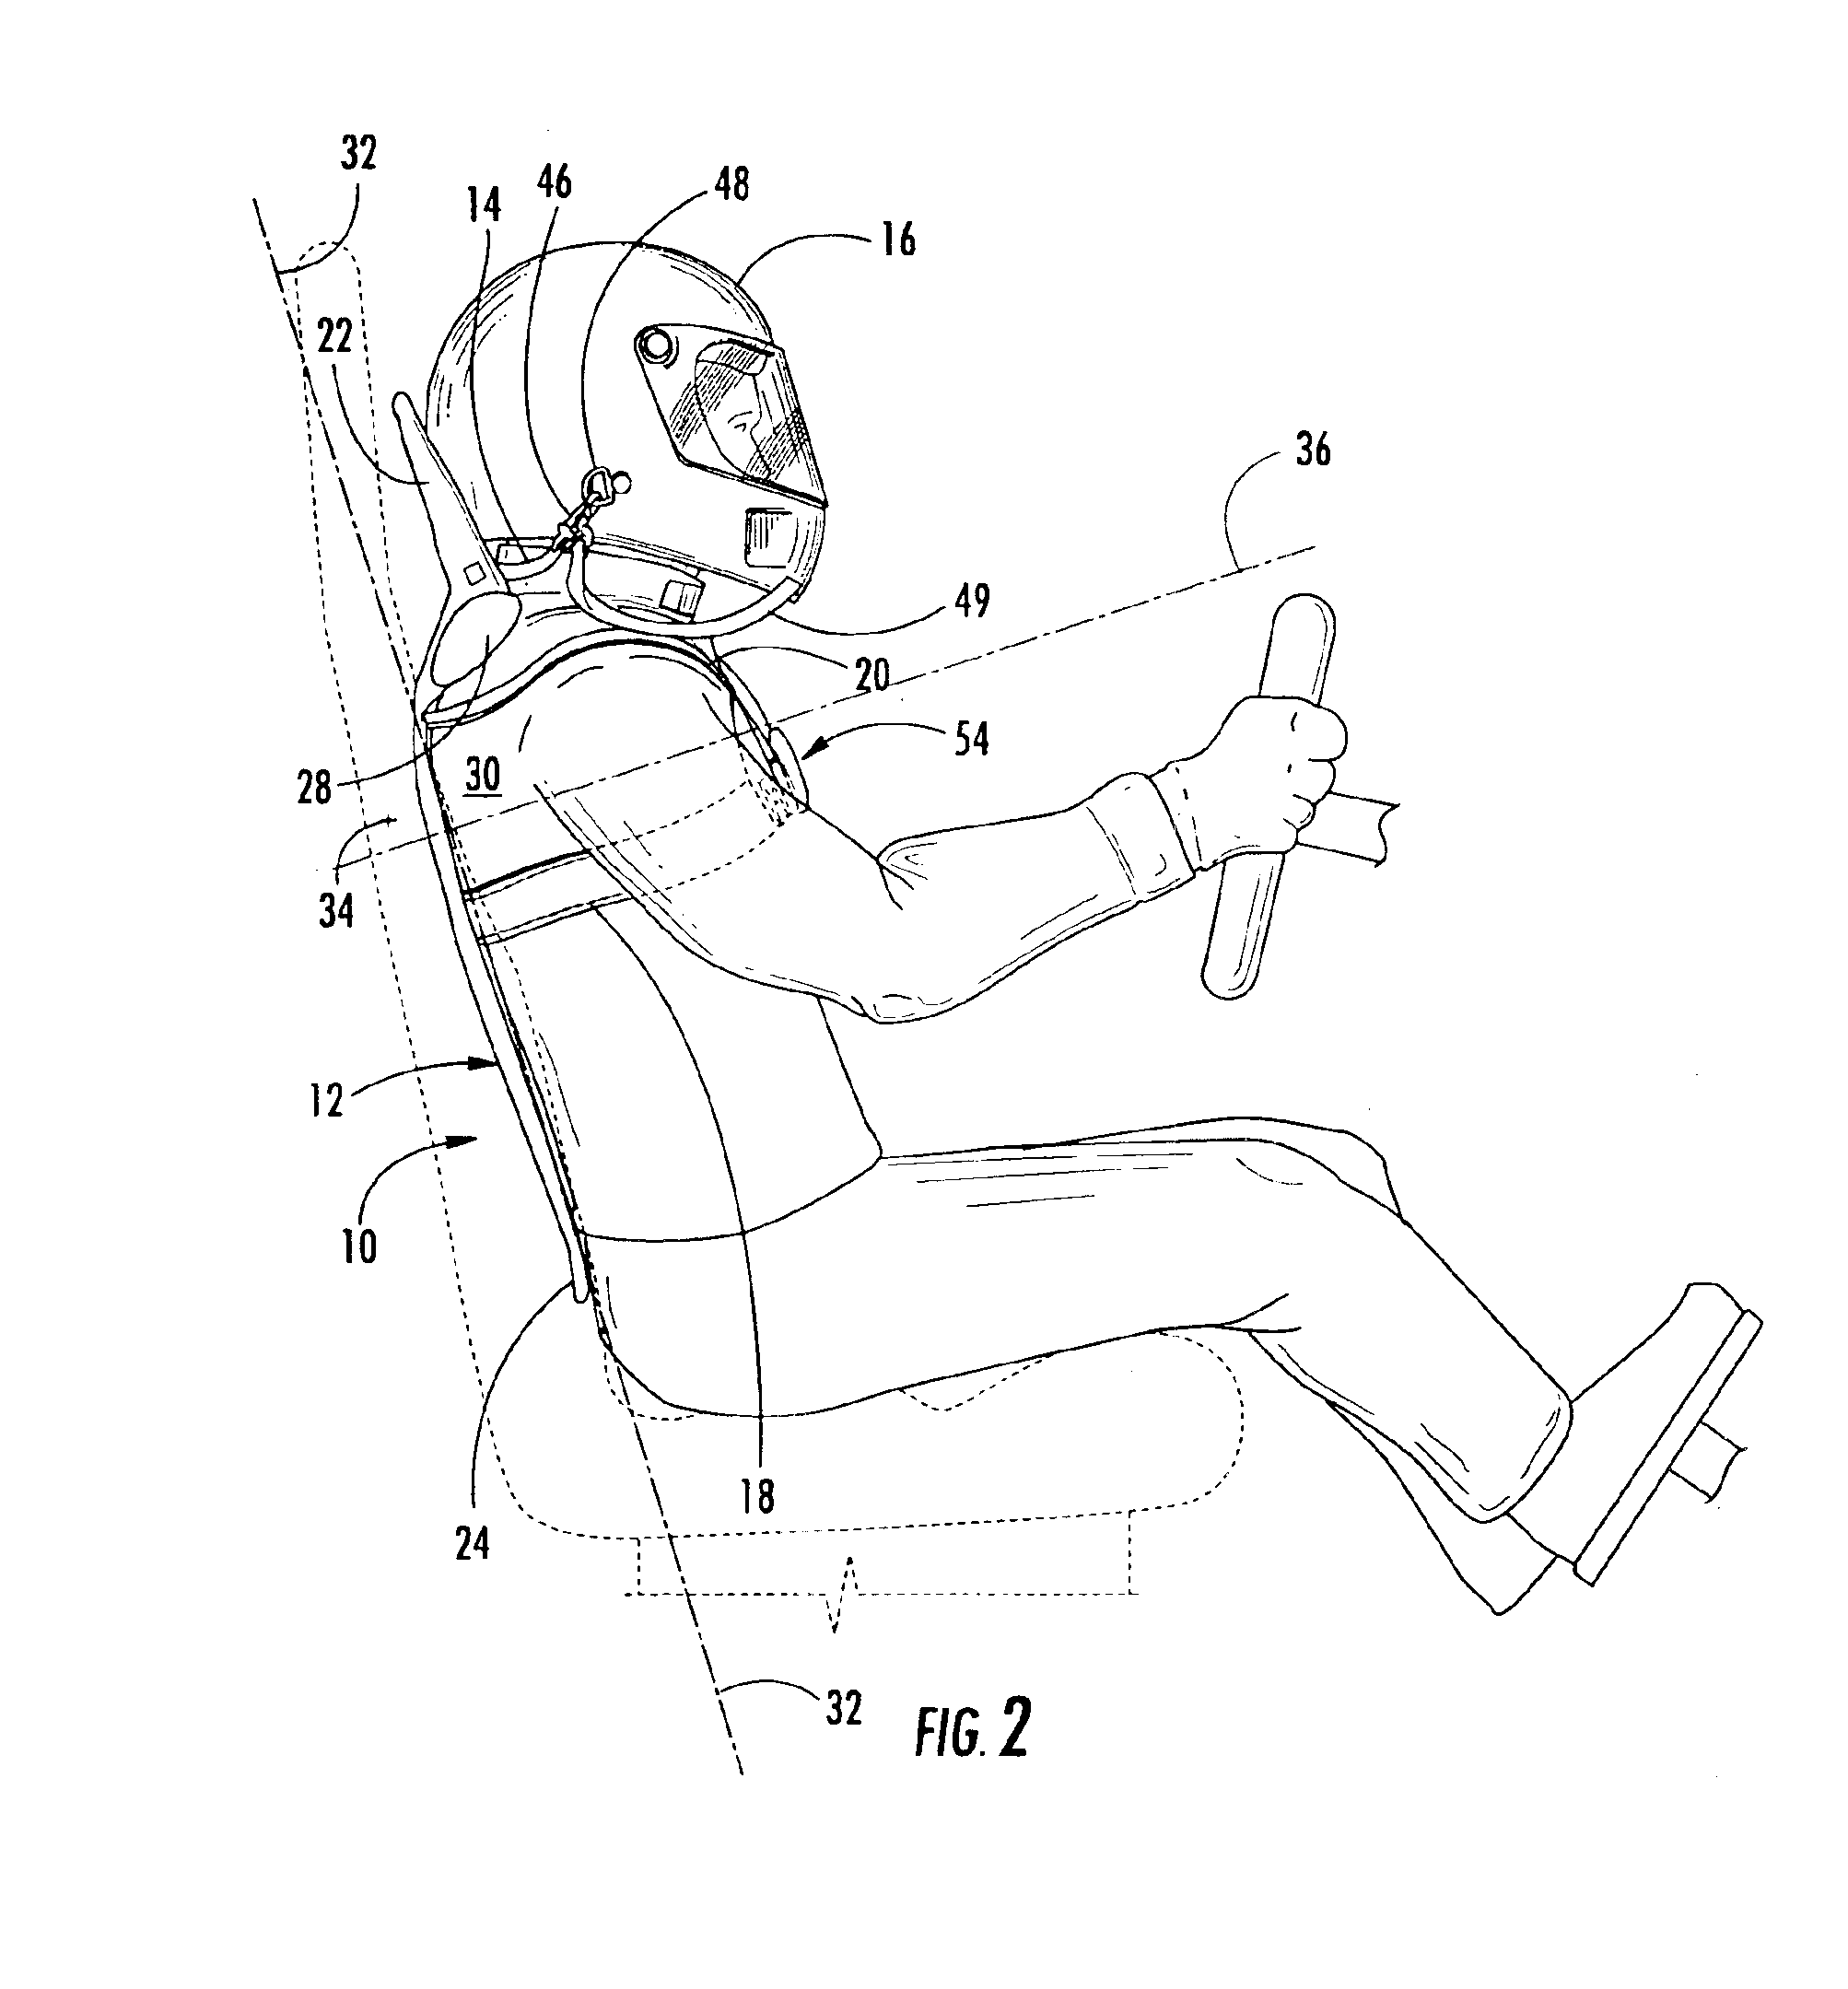 Head restraint device with rigid member for use with a high-performance vehicle